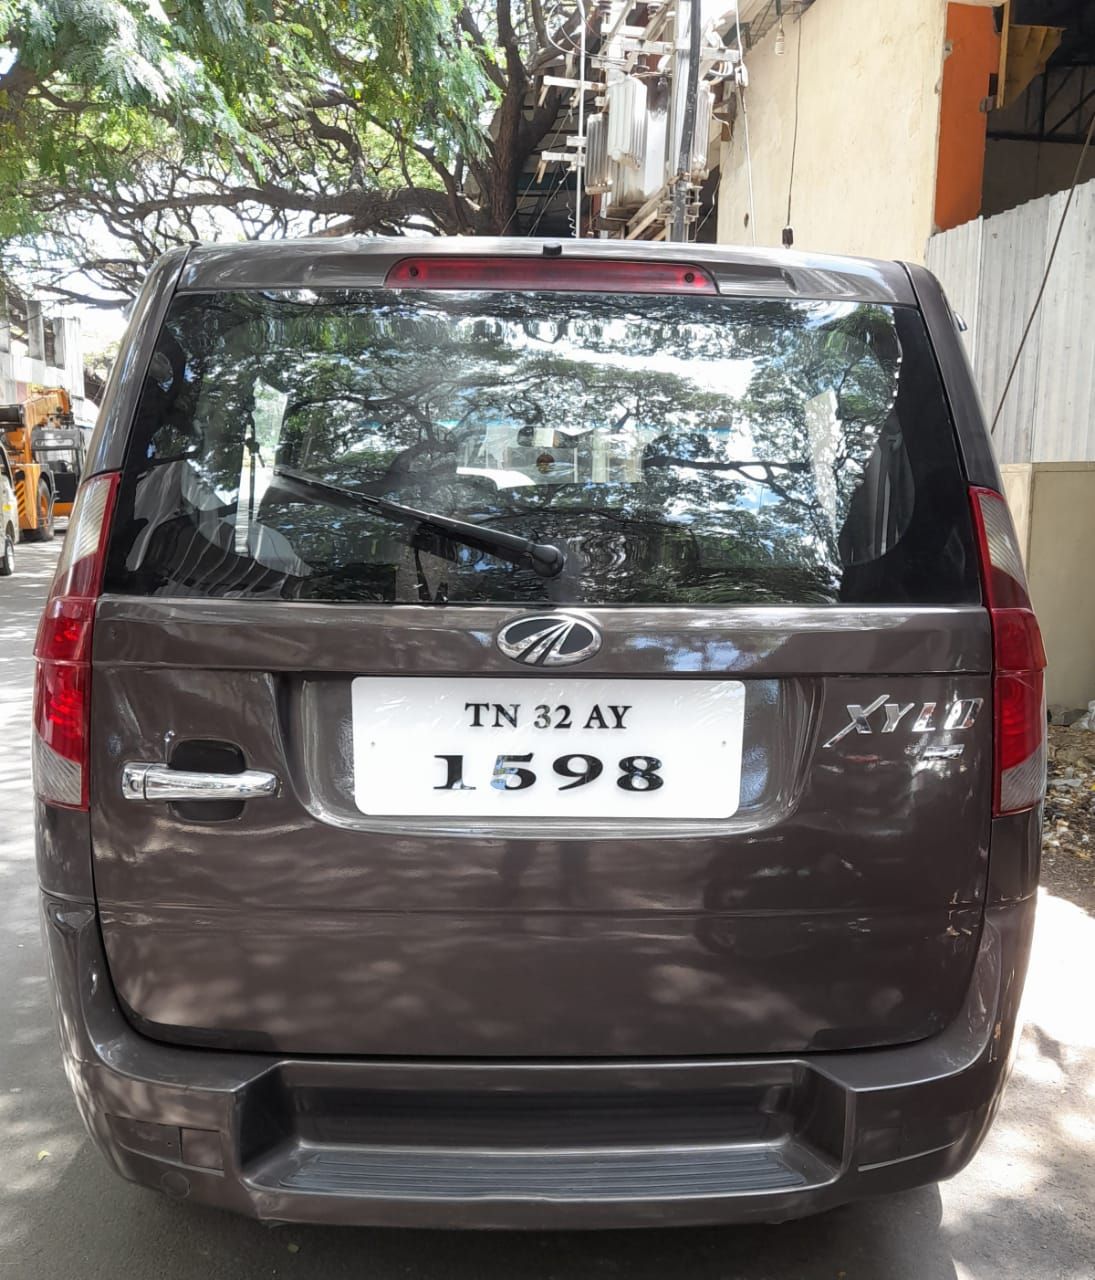 4768-for-sale-Mahindra-Xylo-Diesel-Second-Owner-2011-TN-registered-rs-425000